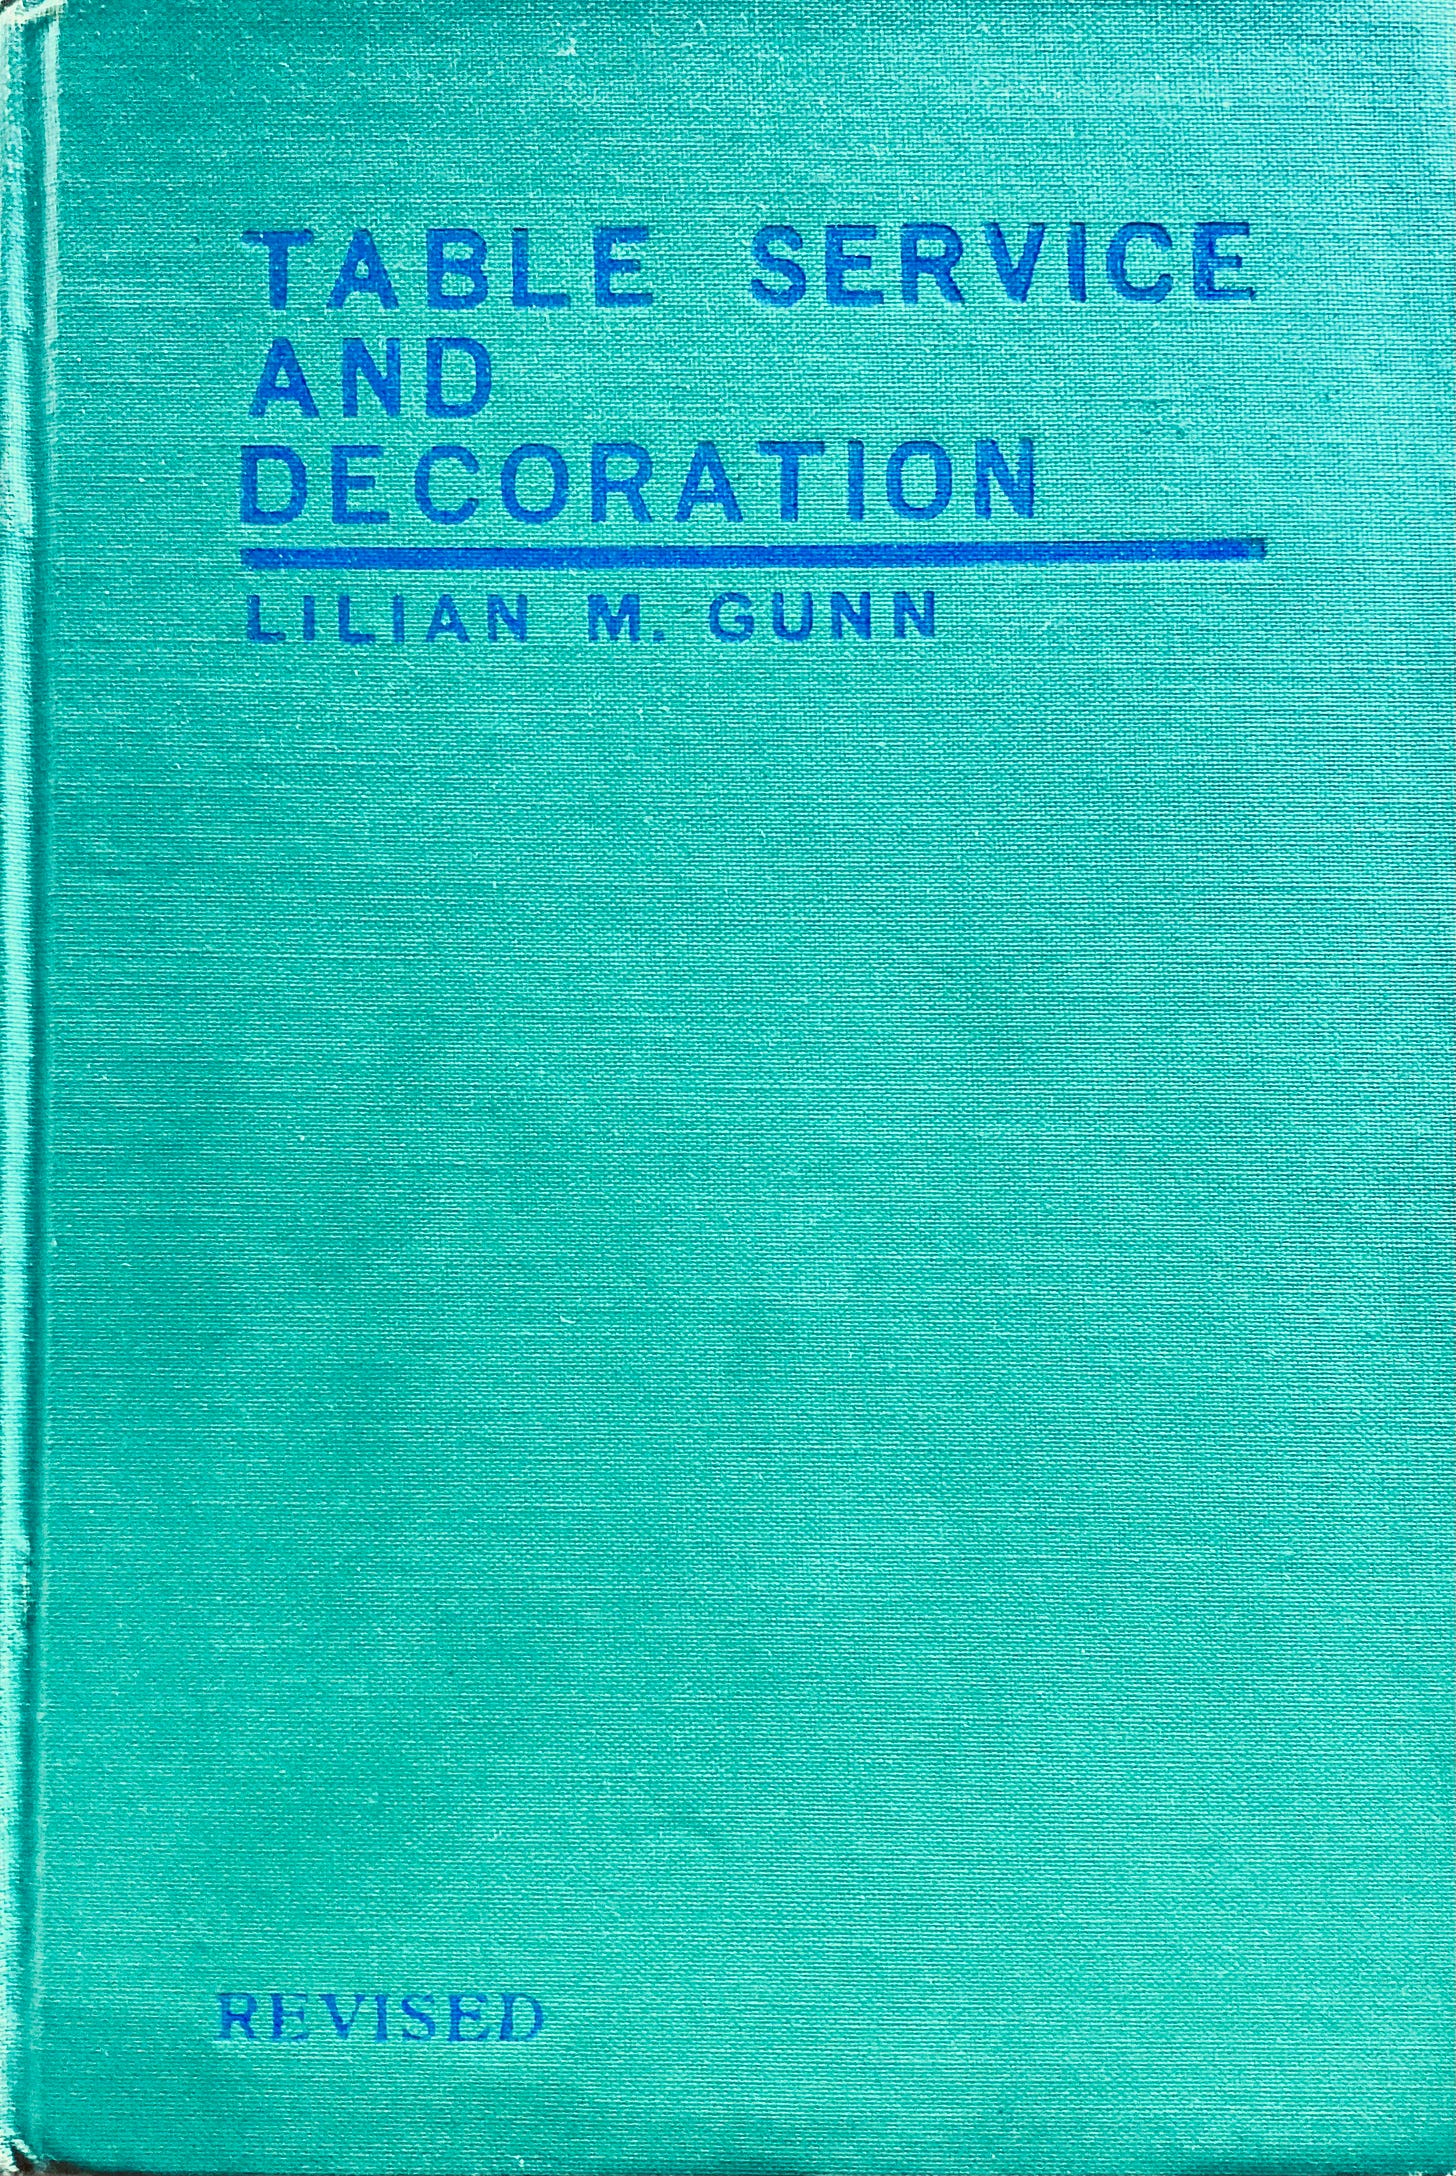 Tealy green cloth bound cover to an old book with Blue debossed font that reads Table Service and Decoration Lilian M. Gunn Revised.